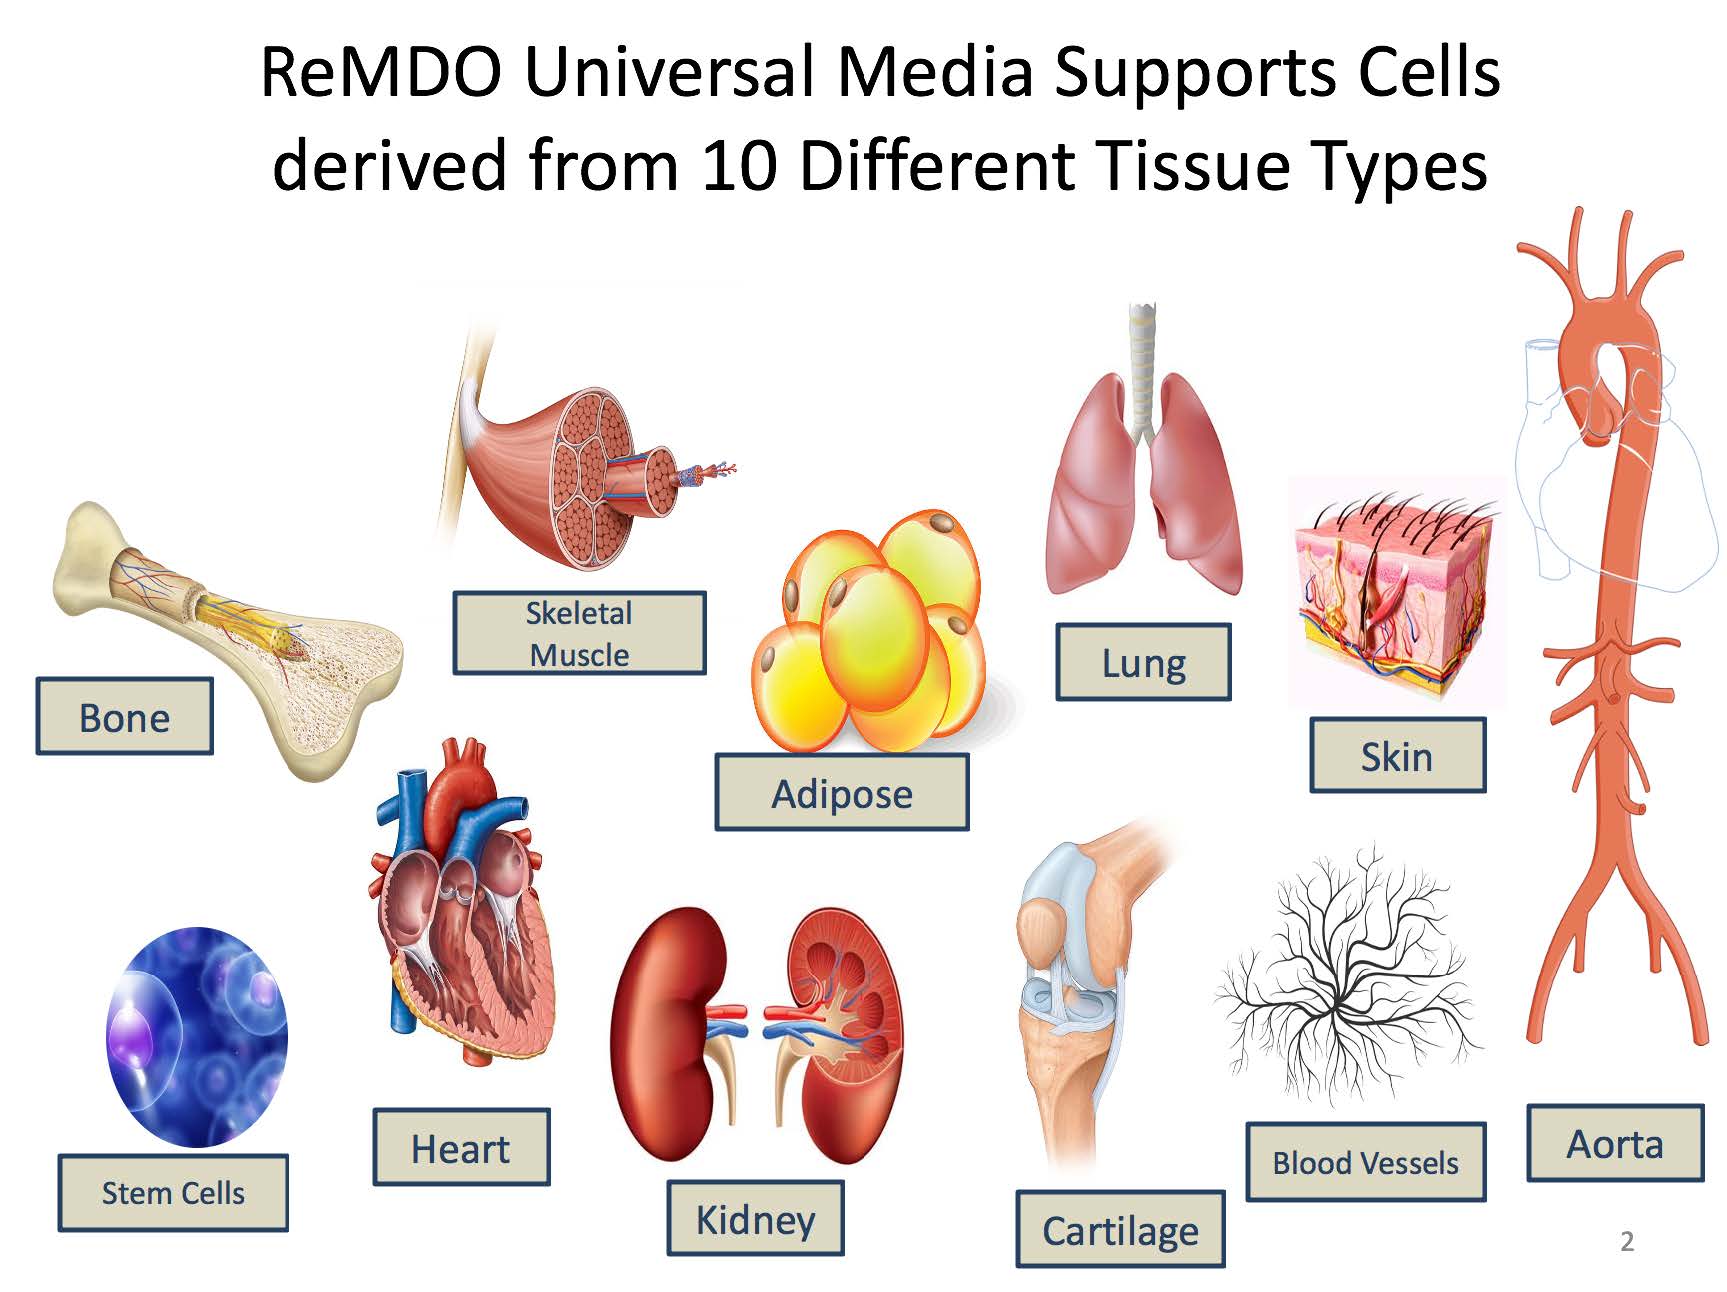 ReMDO Universal Media Supports Cells derived from 10 Different Tissue Types: Bone, Skeletal Muscle, Adipose, Lung, Skin, Stem Cells, Heart, Kidney, Cartilage, Blood Vessels, Aorta